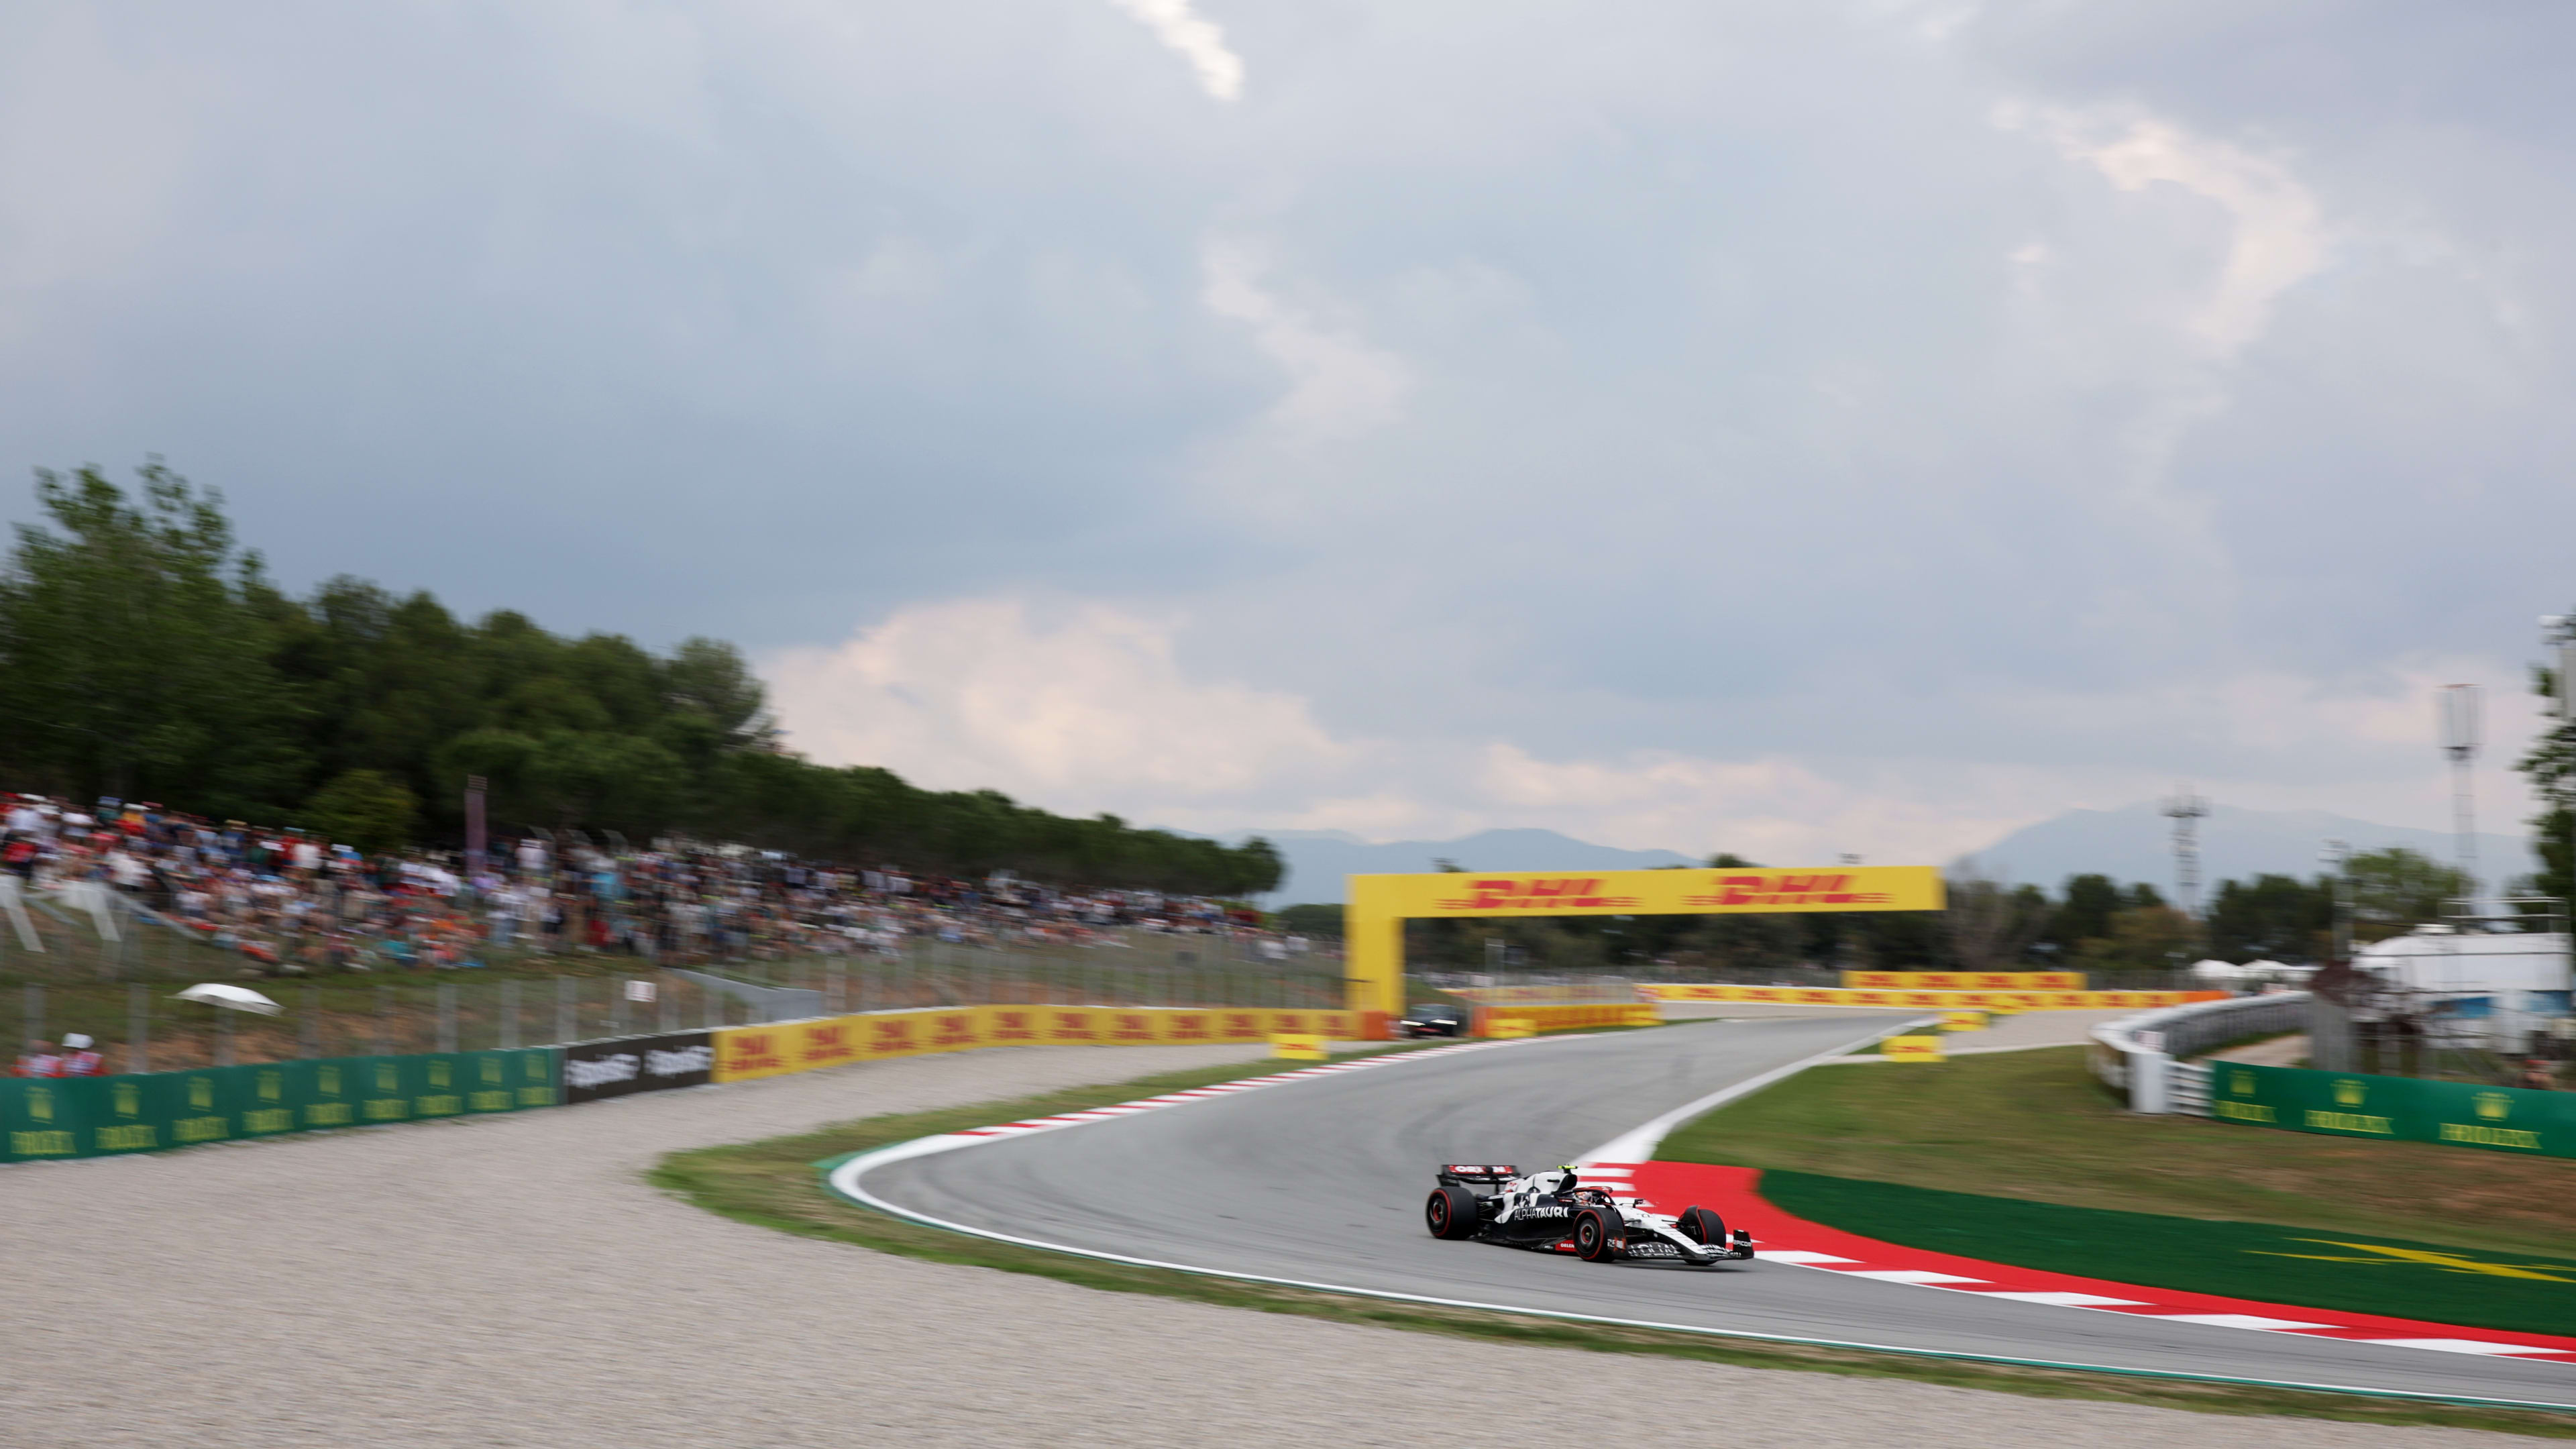 LIVE COVERAGE Follow all the action from second practice for the Spanish Grand Prix